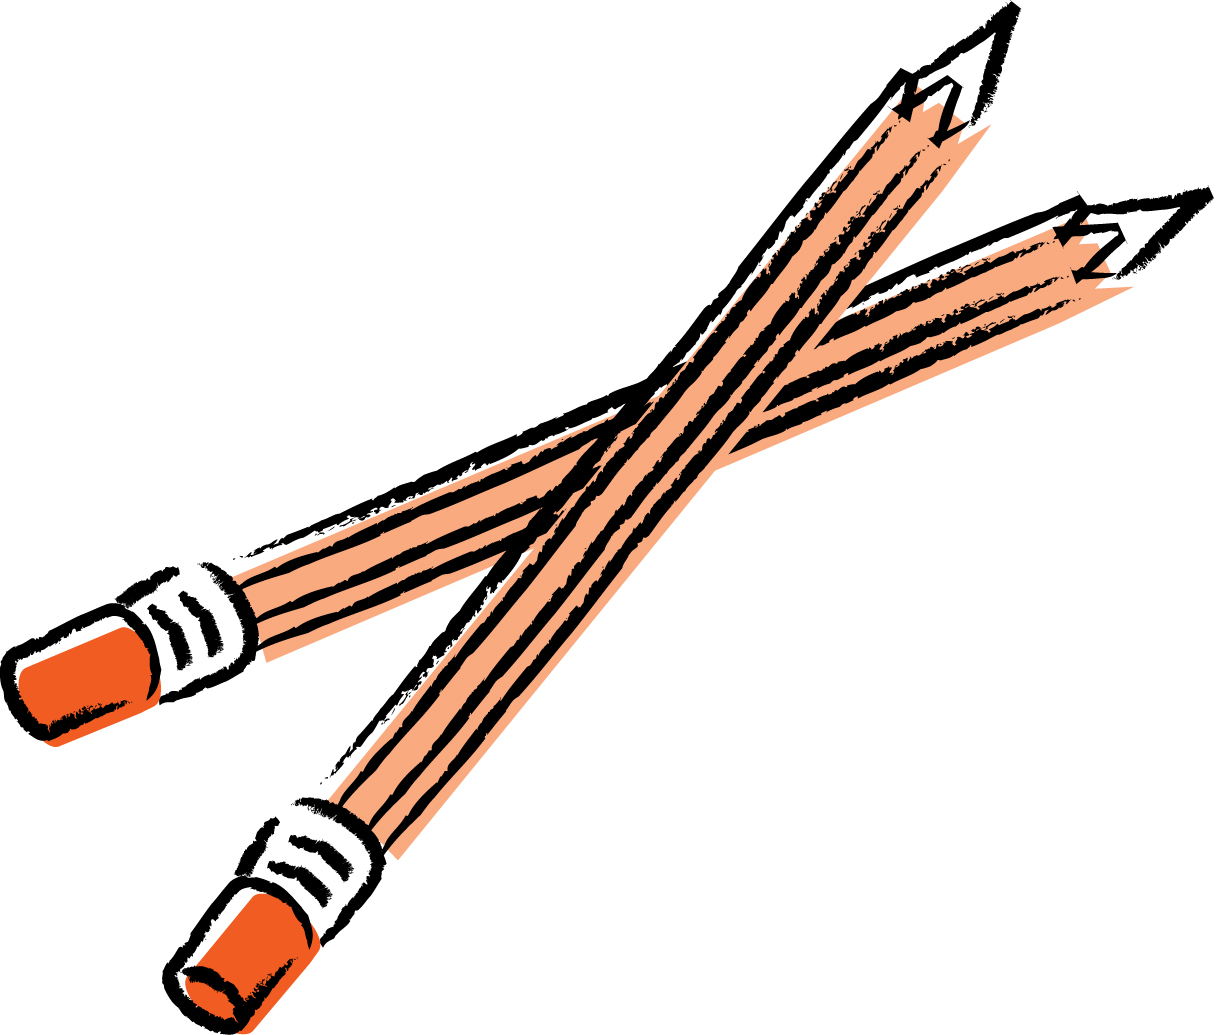 Pencil Clip Art Black And White | Clipart library - Free Clipart Images